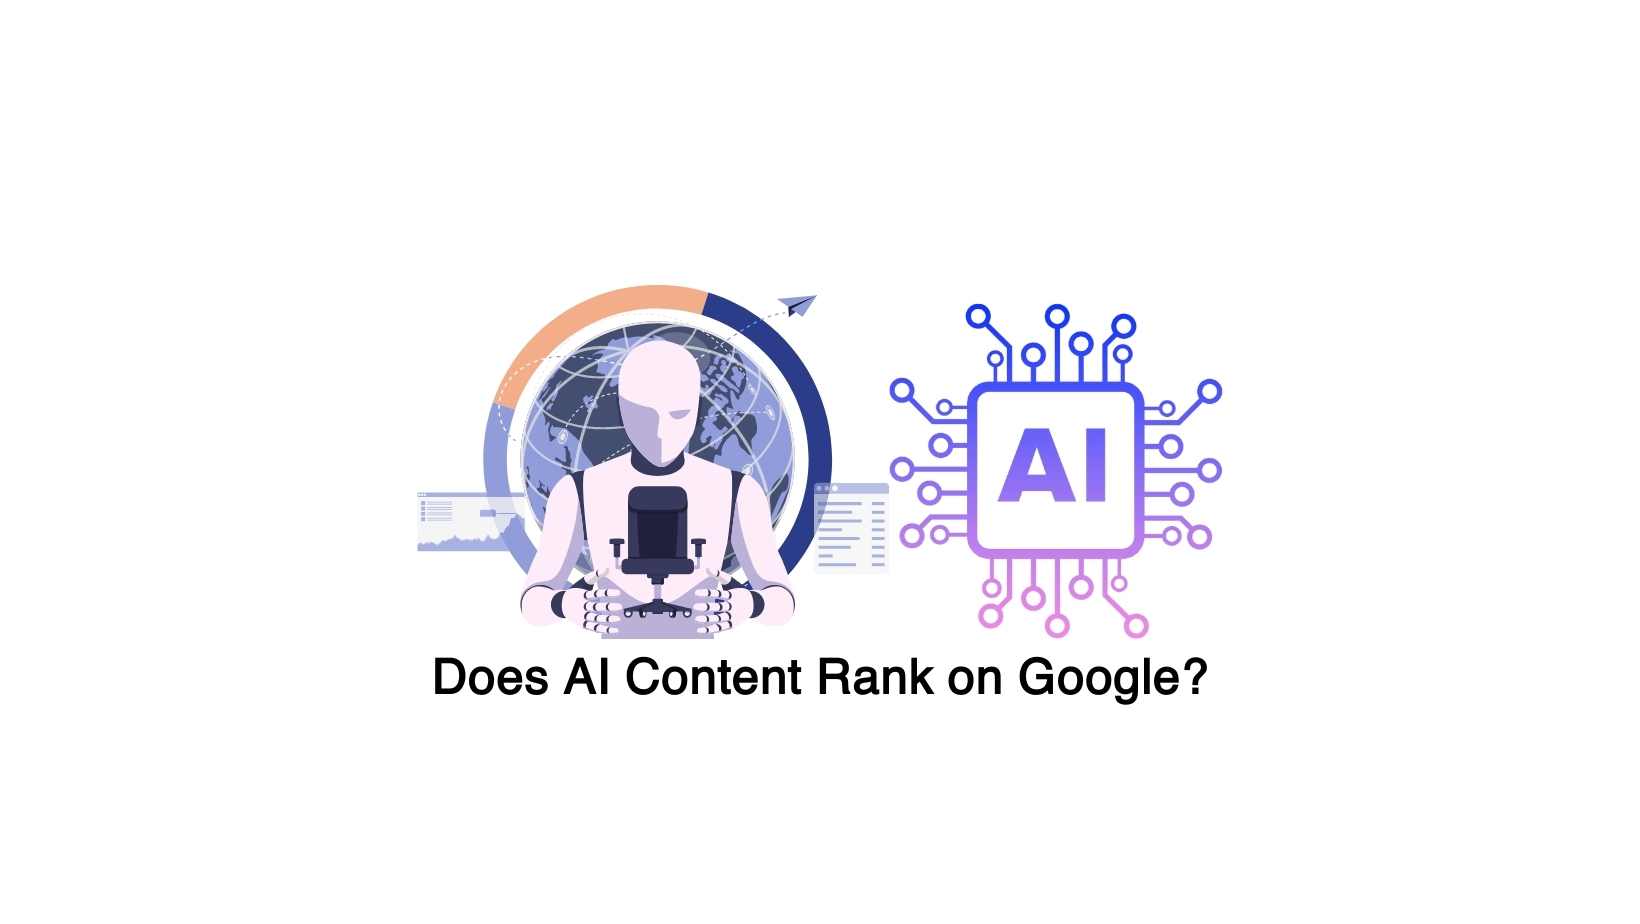 Does AI Content Rank on Google